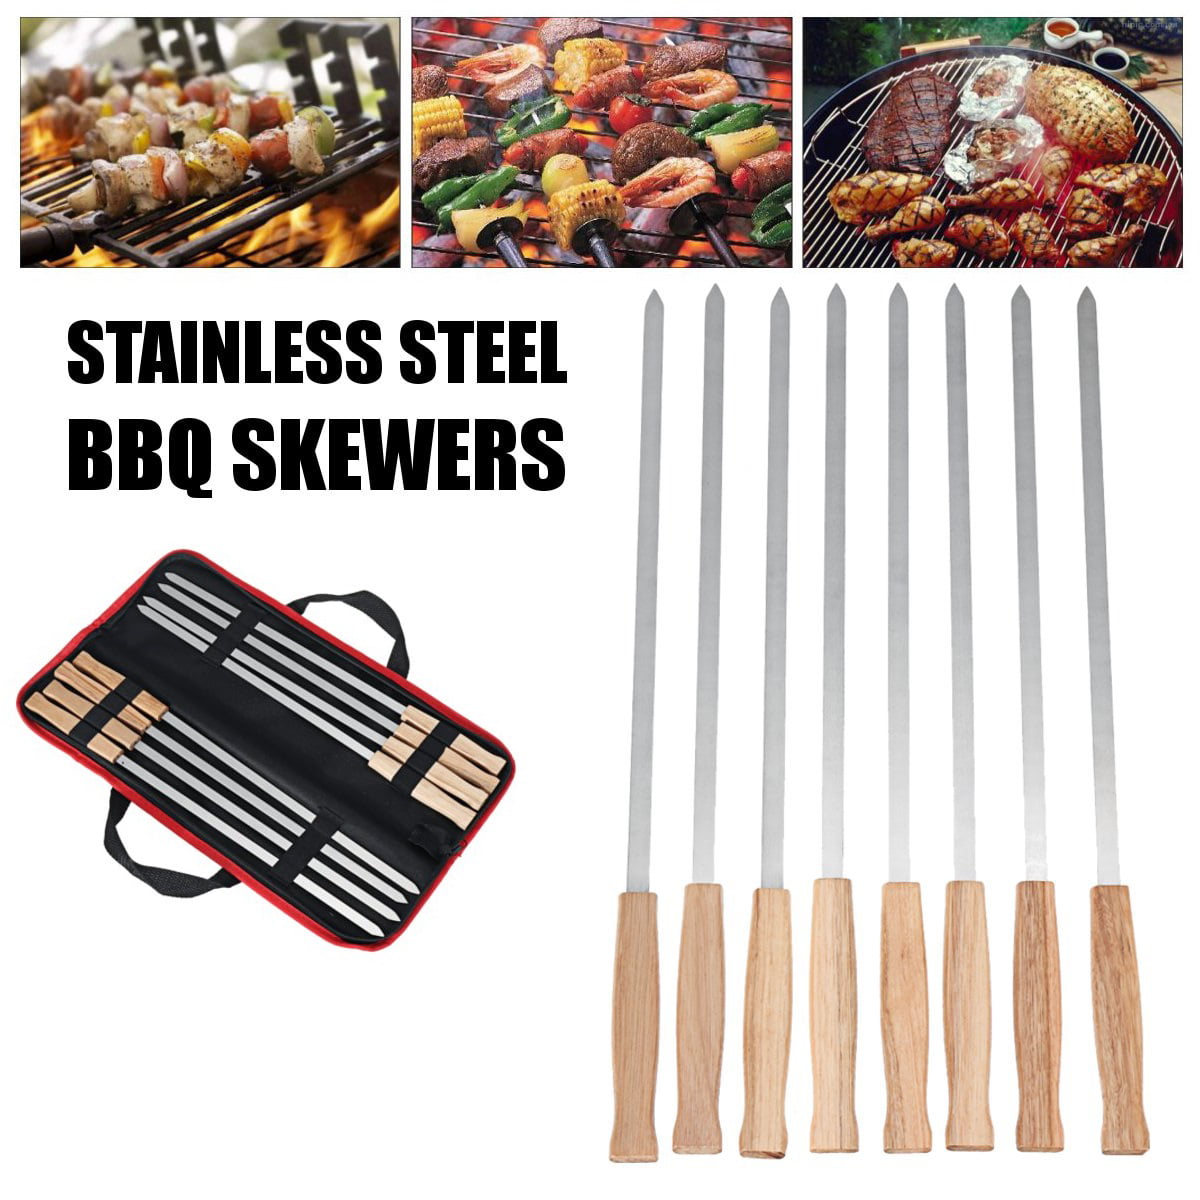 15x Shish Skewers Barbeque BBQ Kebab Flat Fork Long Stick Stainless Steel 16inch 